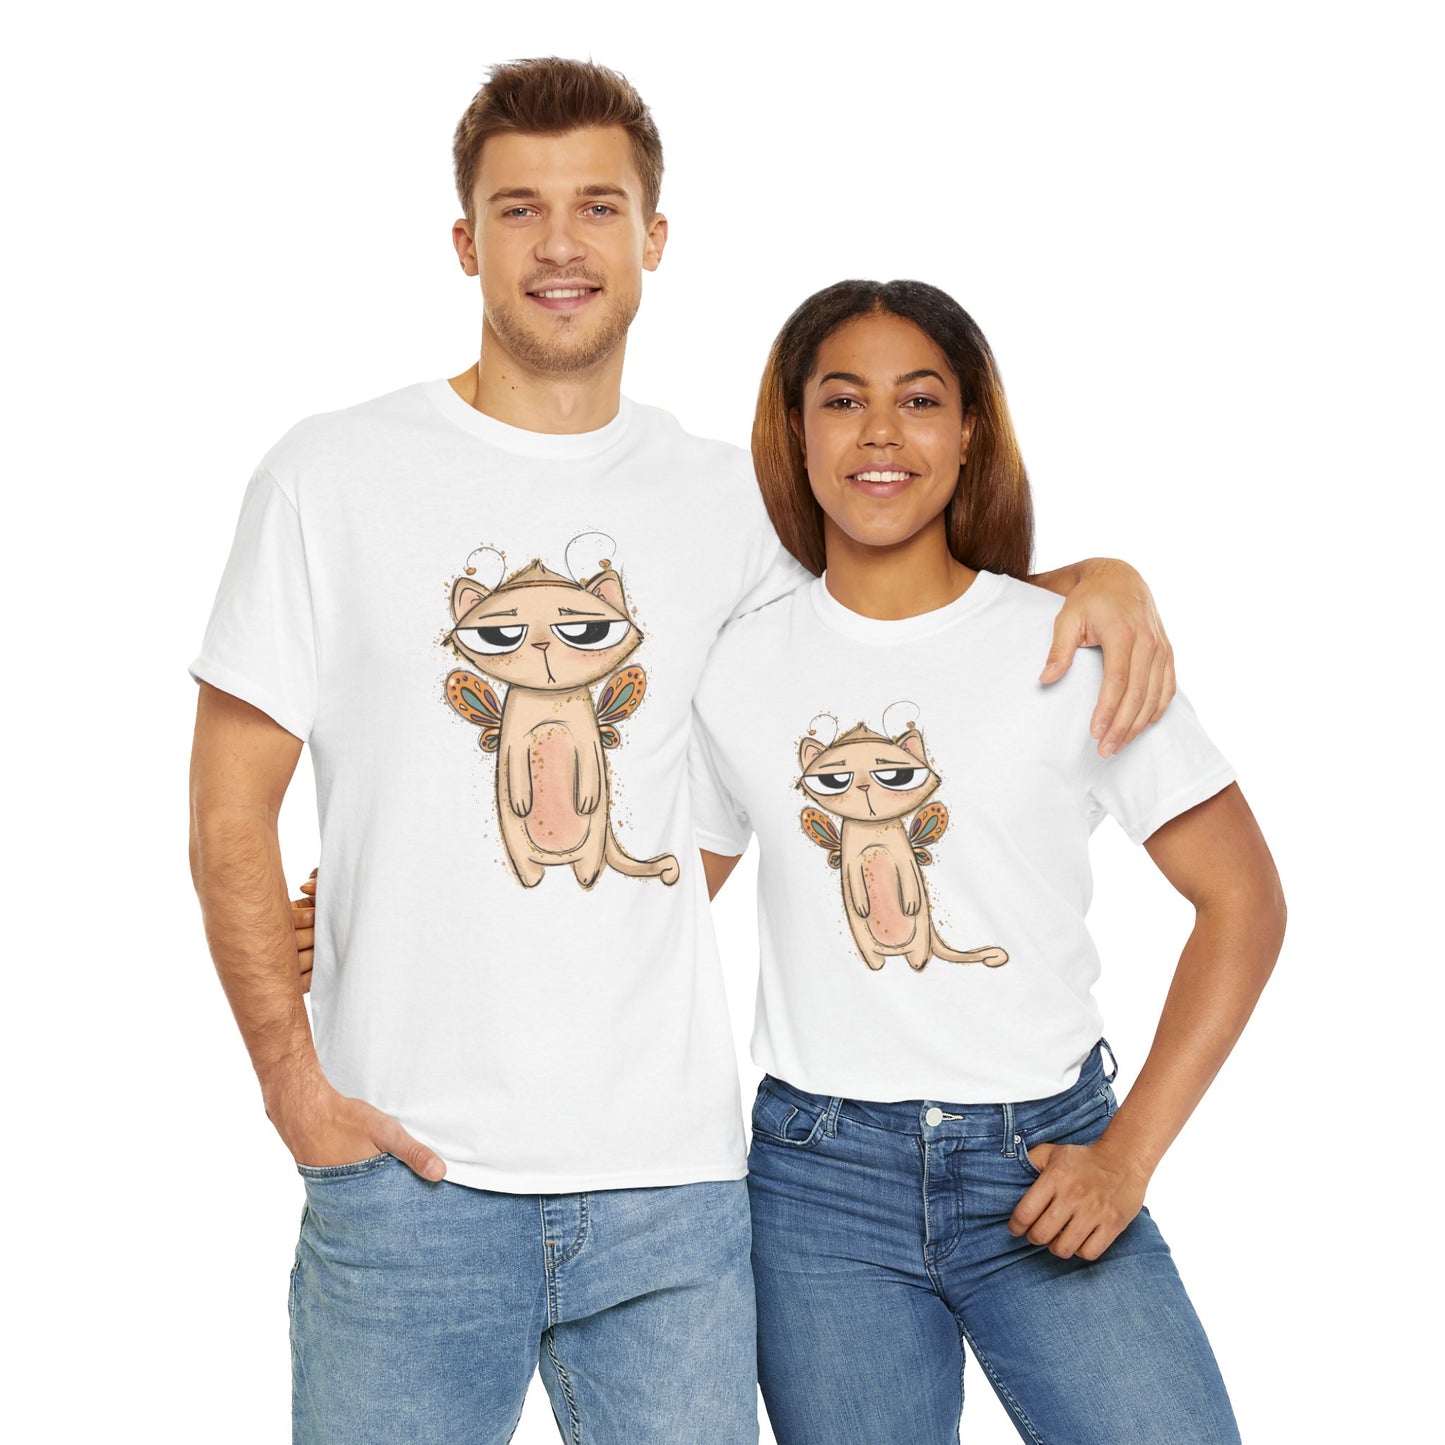 Funny T-Shirts, Twisted T-Shirts for Women and Men | C101